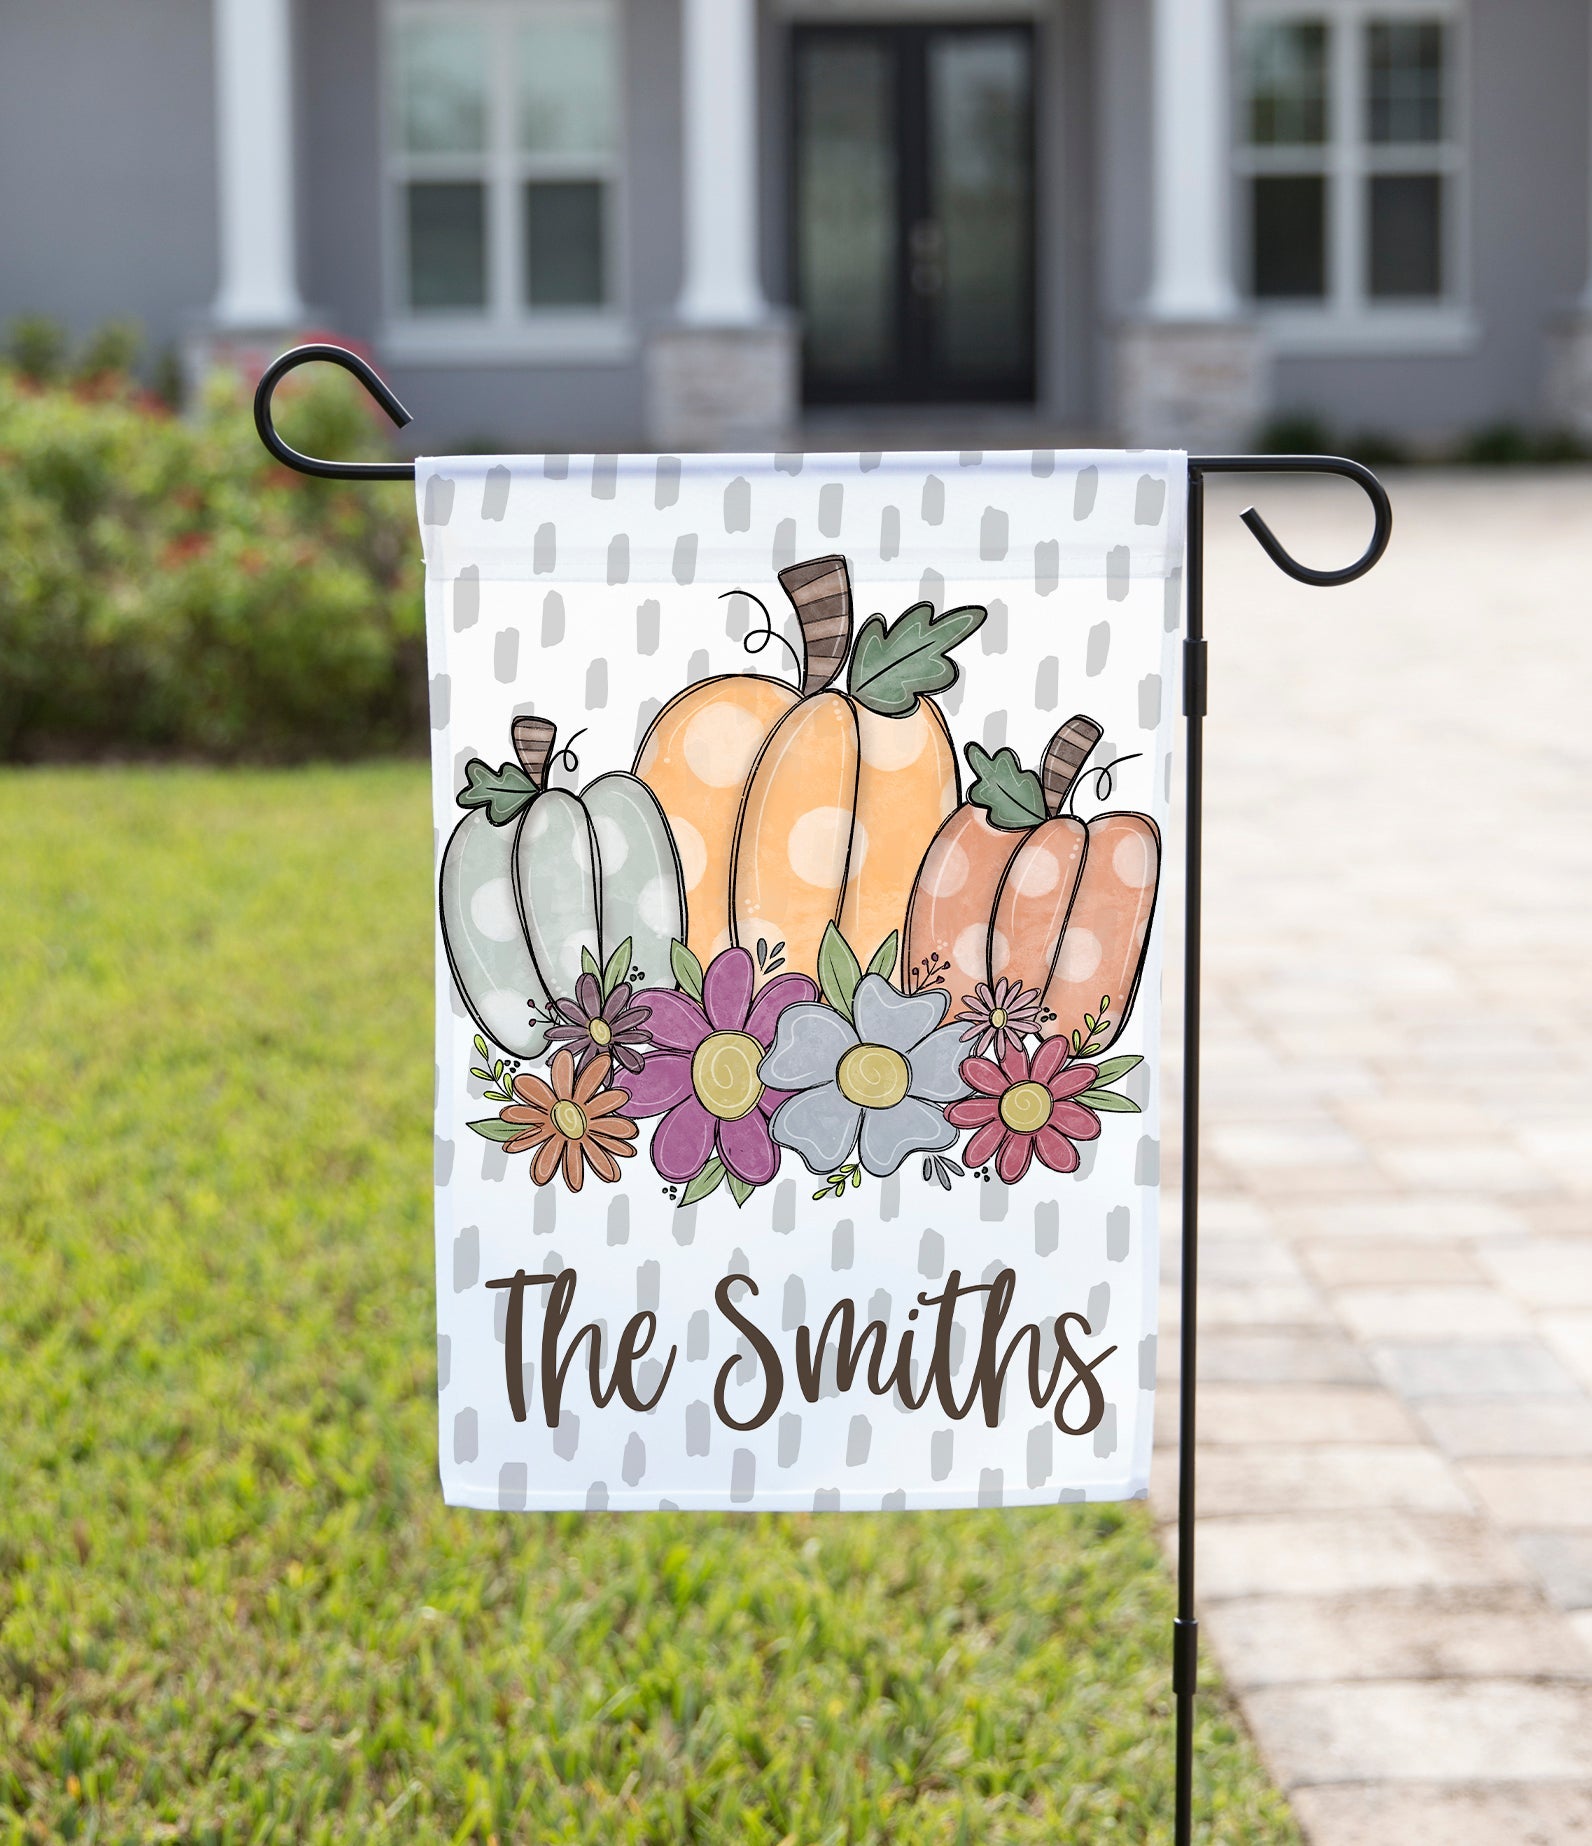 Fall Thanksgiving Flags! Handcrafted with love and a touch of charm, these flags are the perfect way to celebrate the season in style. Each flag is adorned with adorable designs featuring turkeys and pumpkins, expertly crafted to bring a touch of thankful spirit to your home or garden.